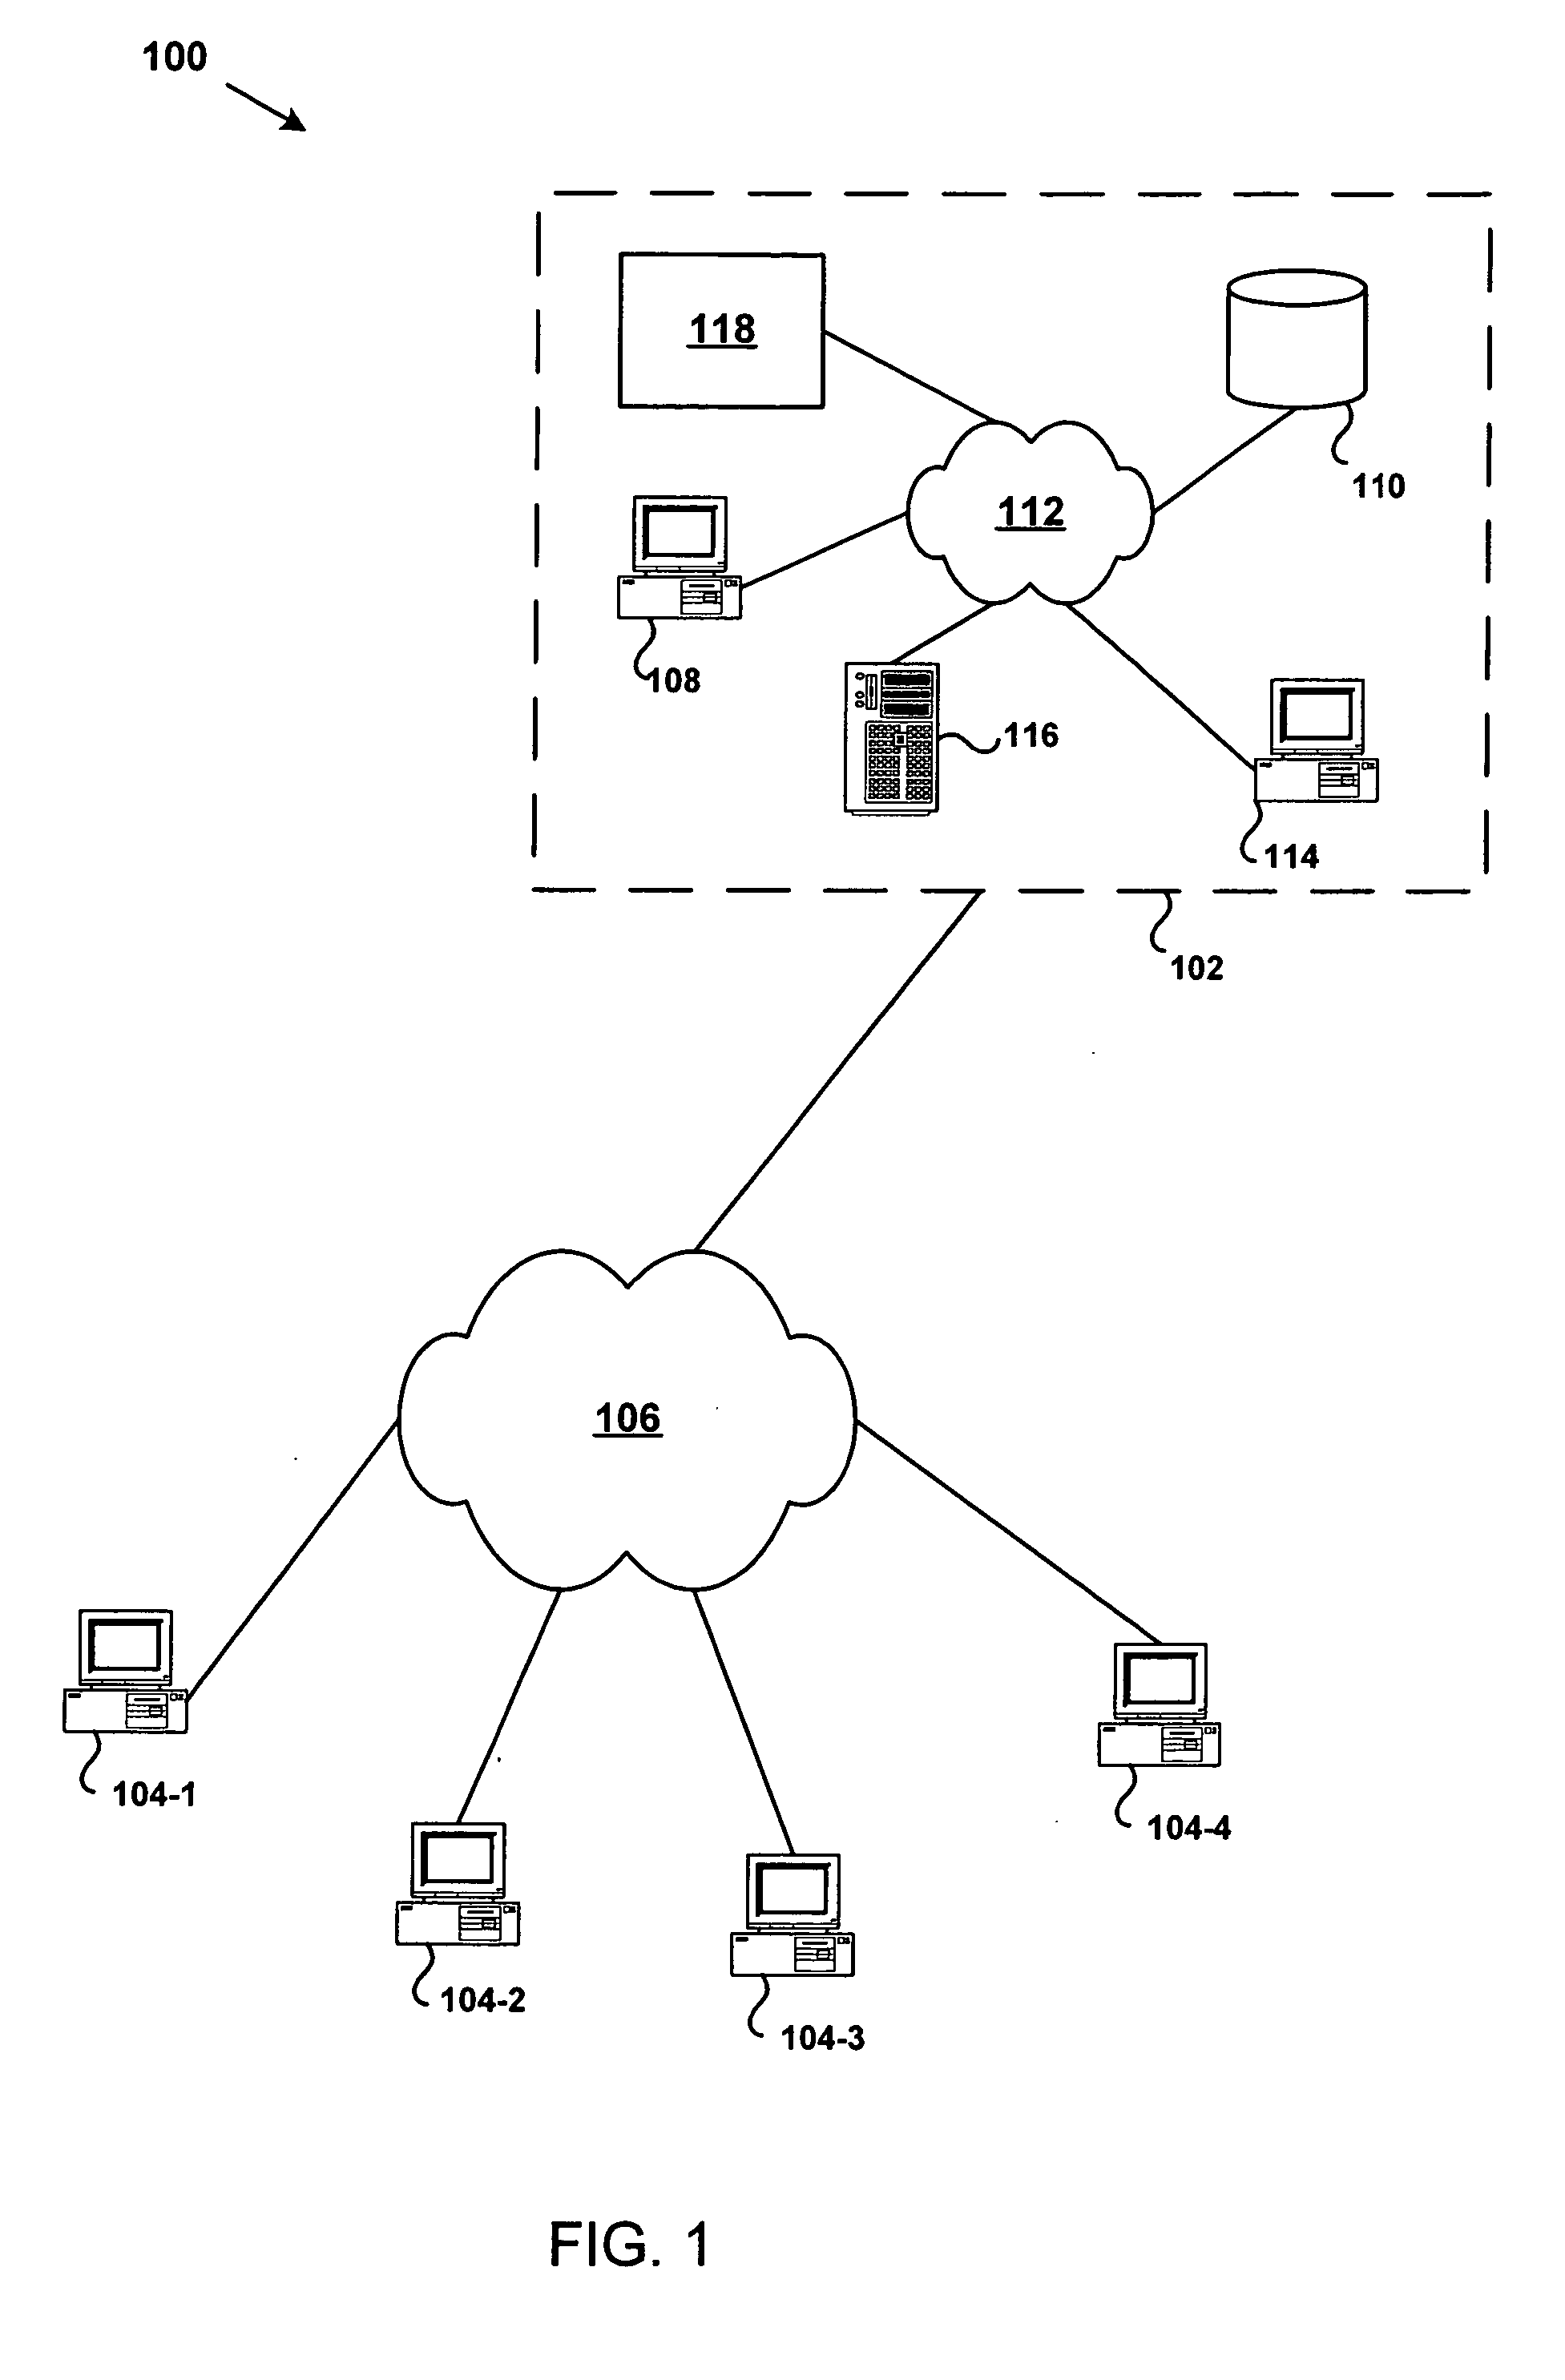 Confidence-based conversion of language to data systems and methods